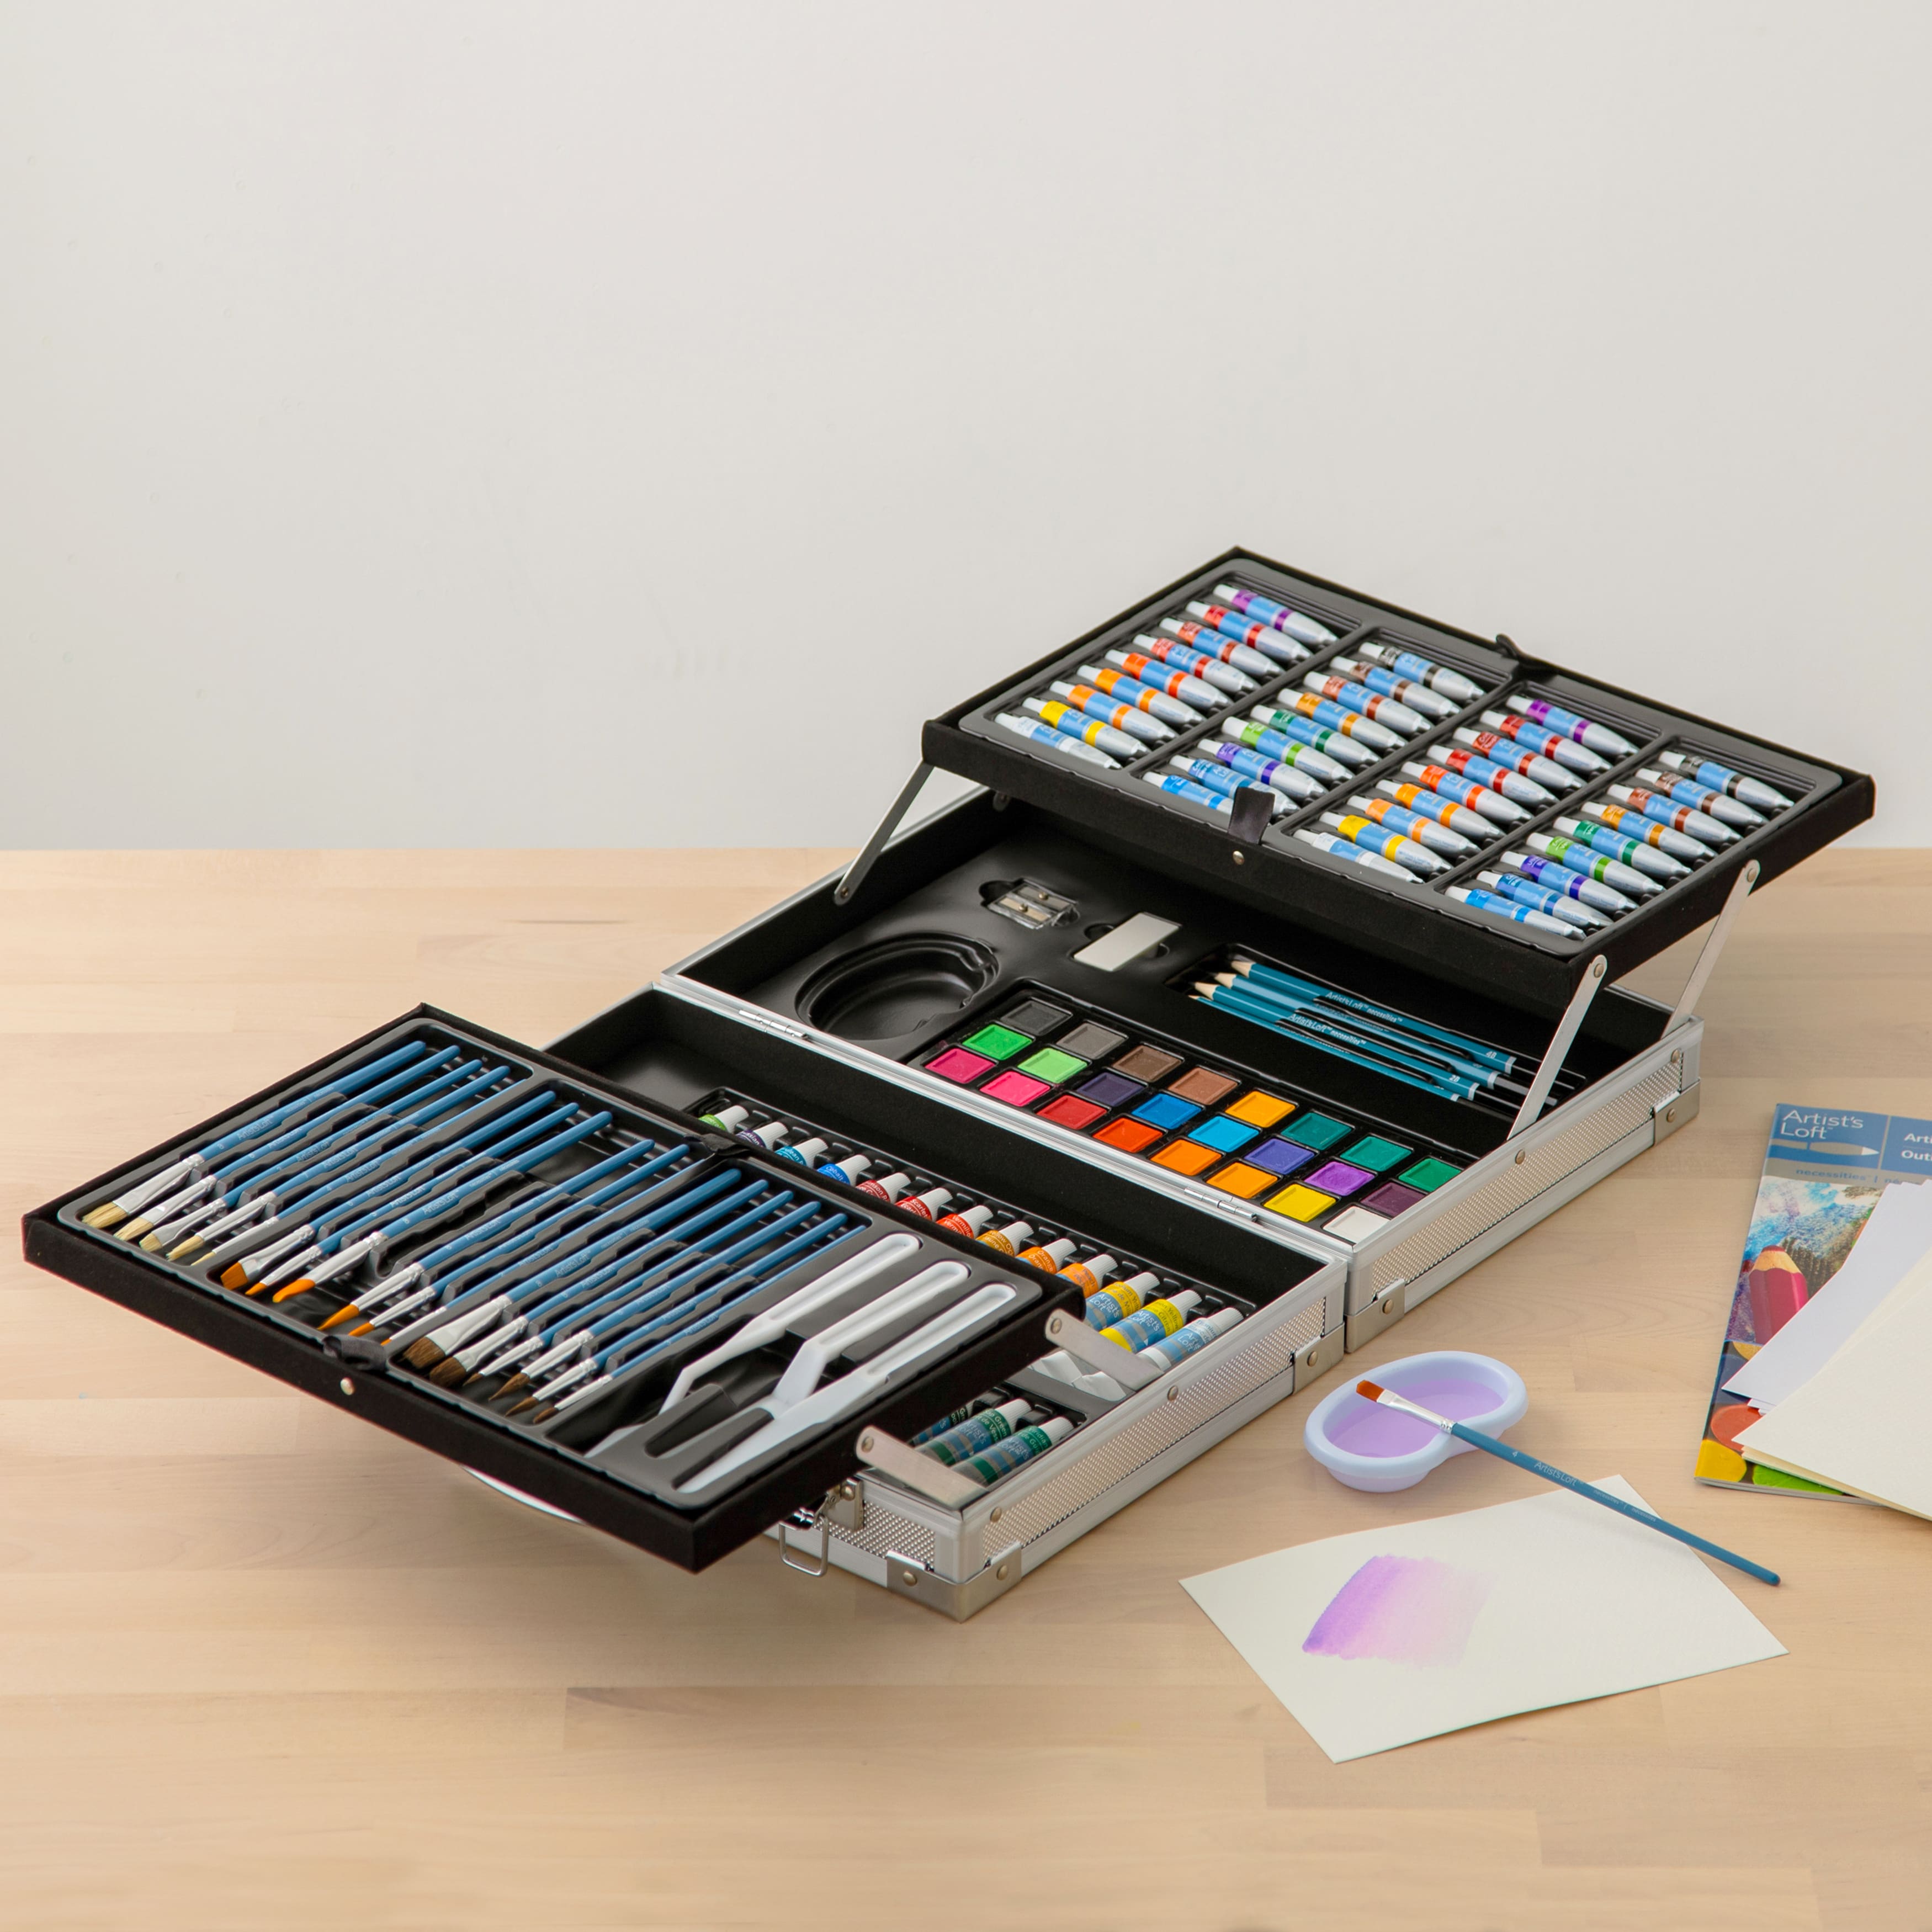 25 Piece Drawing & Sketching Set by Artist's Loft™